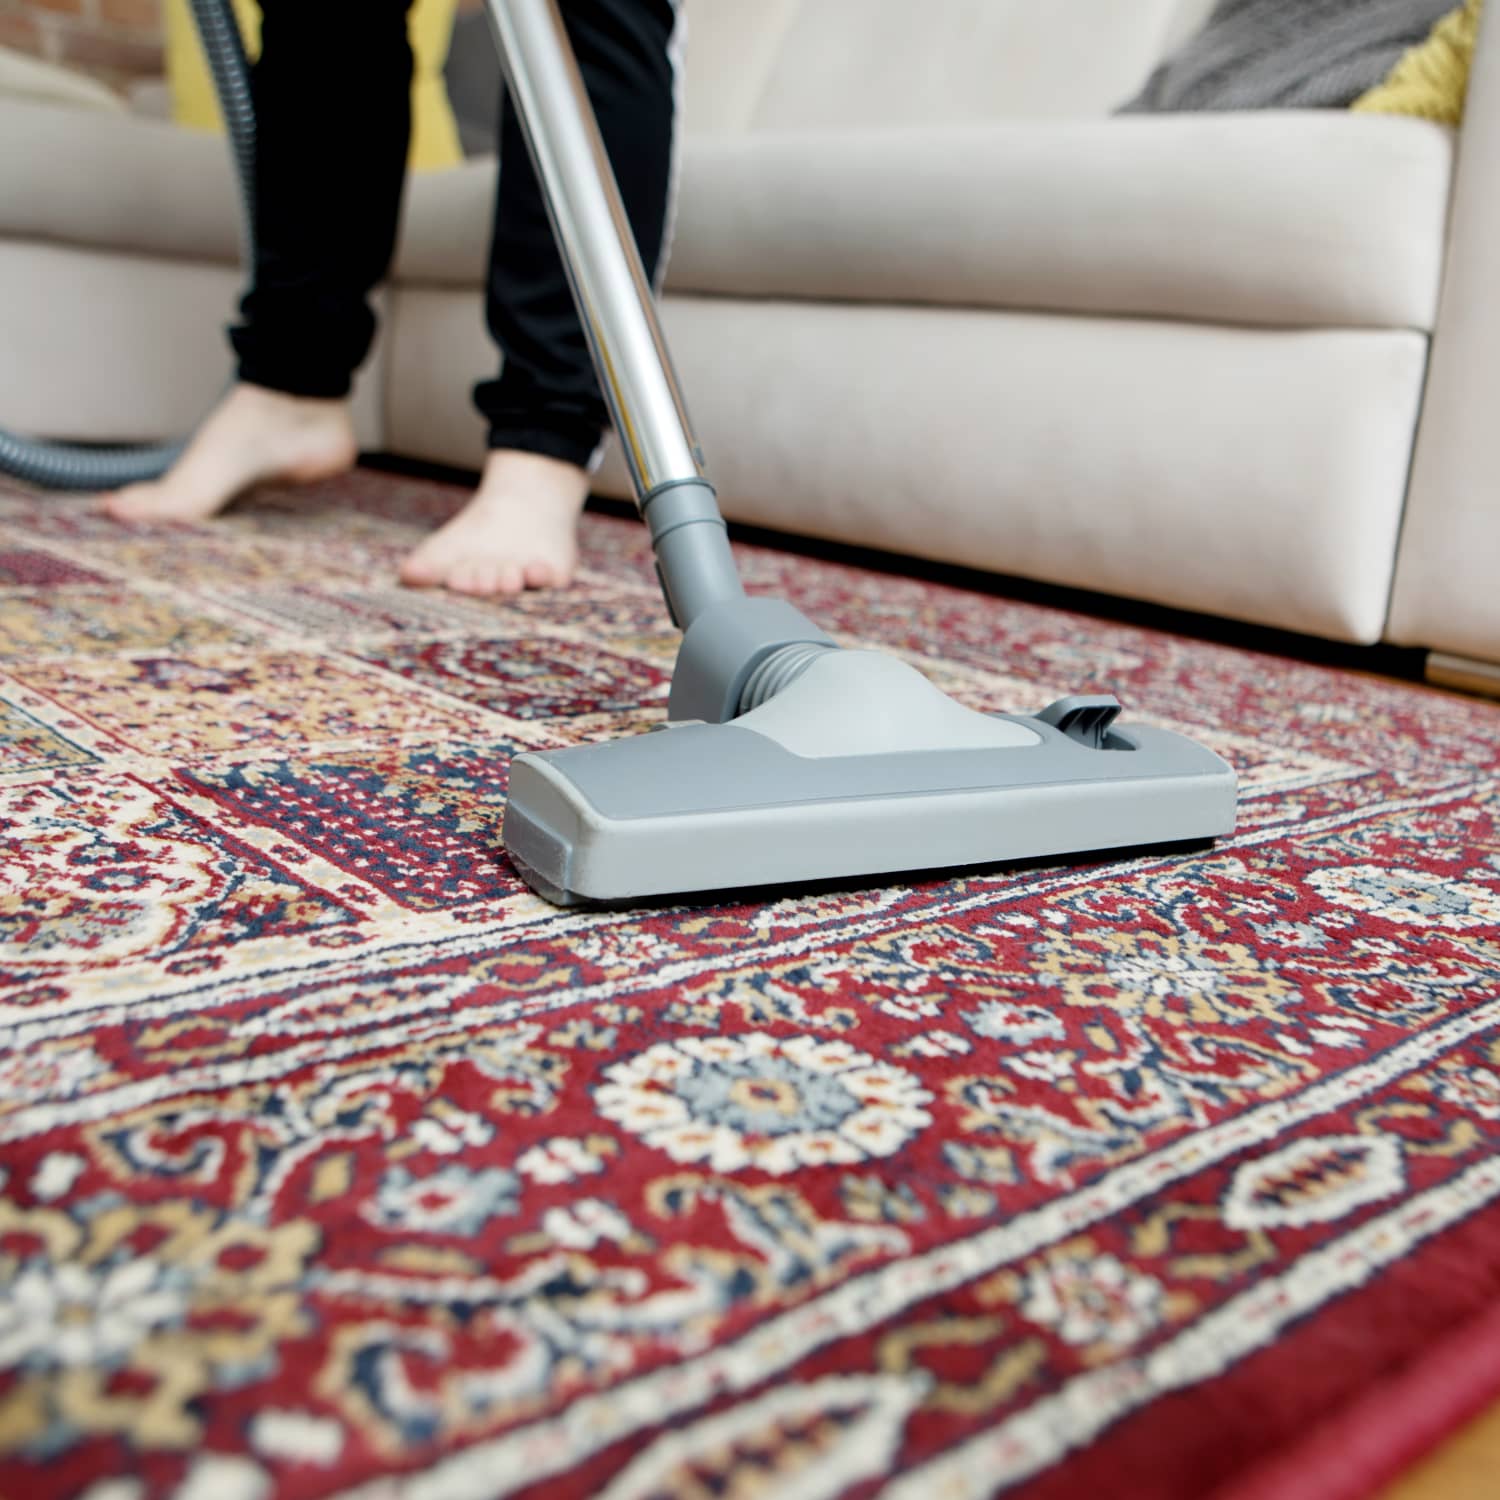 How To Buy The Right Vacuum One Reddit Favorite Expert S Advice